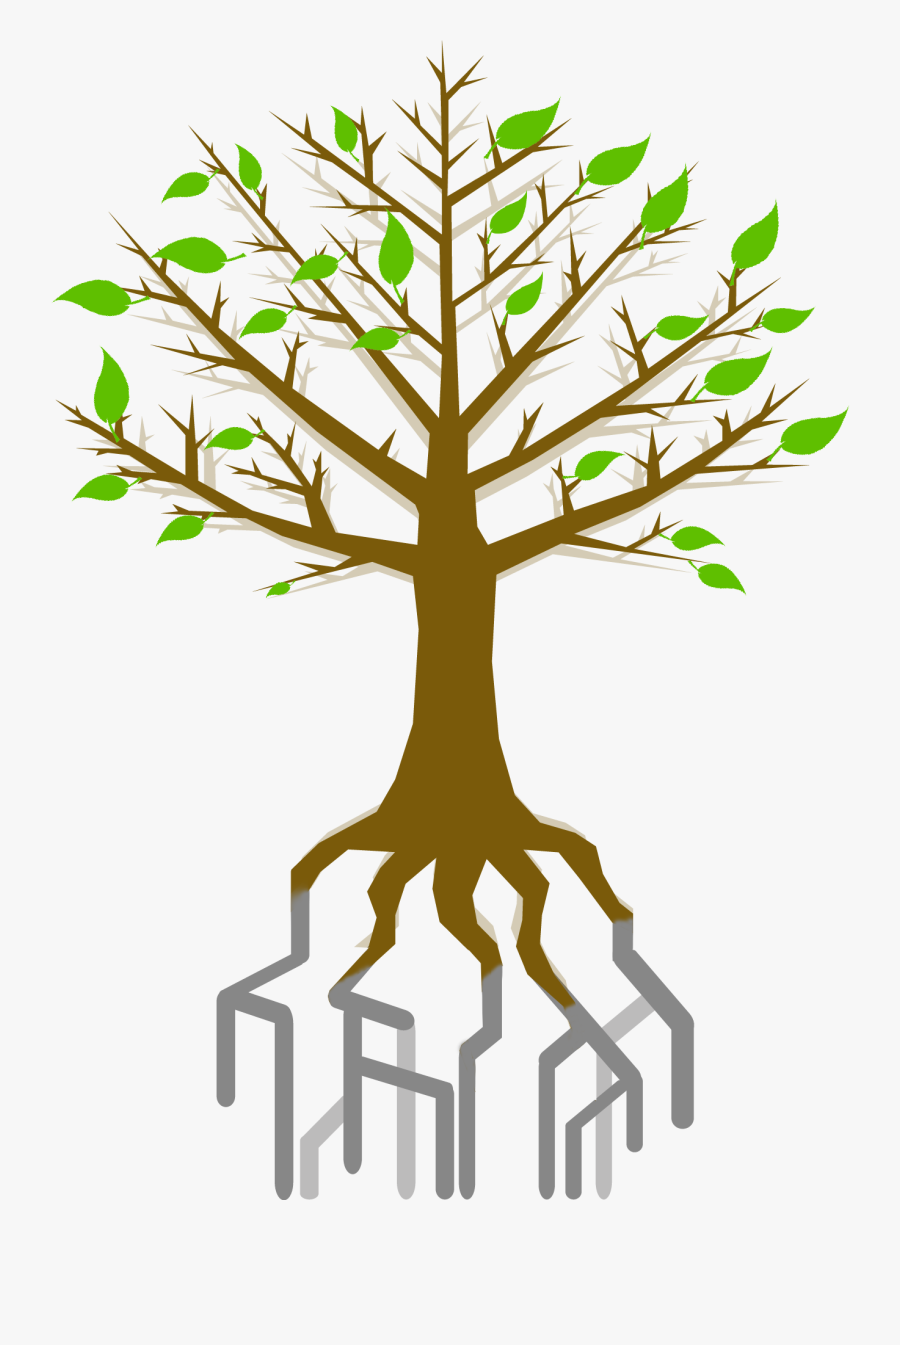 Clipart Tree With Roots Without Leaves, Transparent Clipart